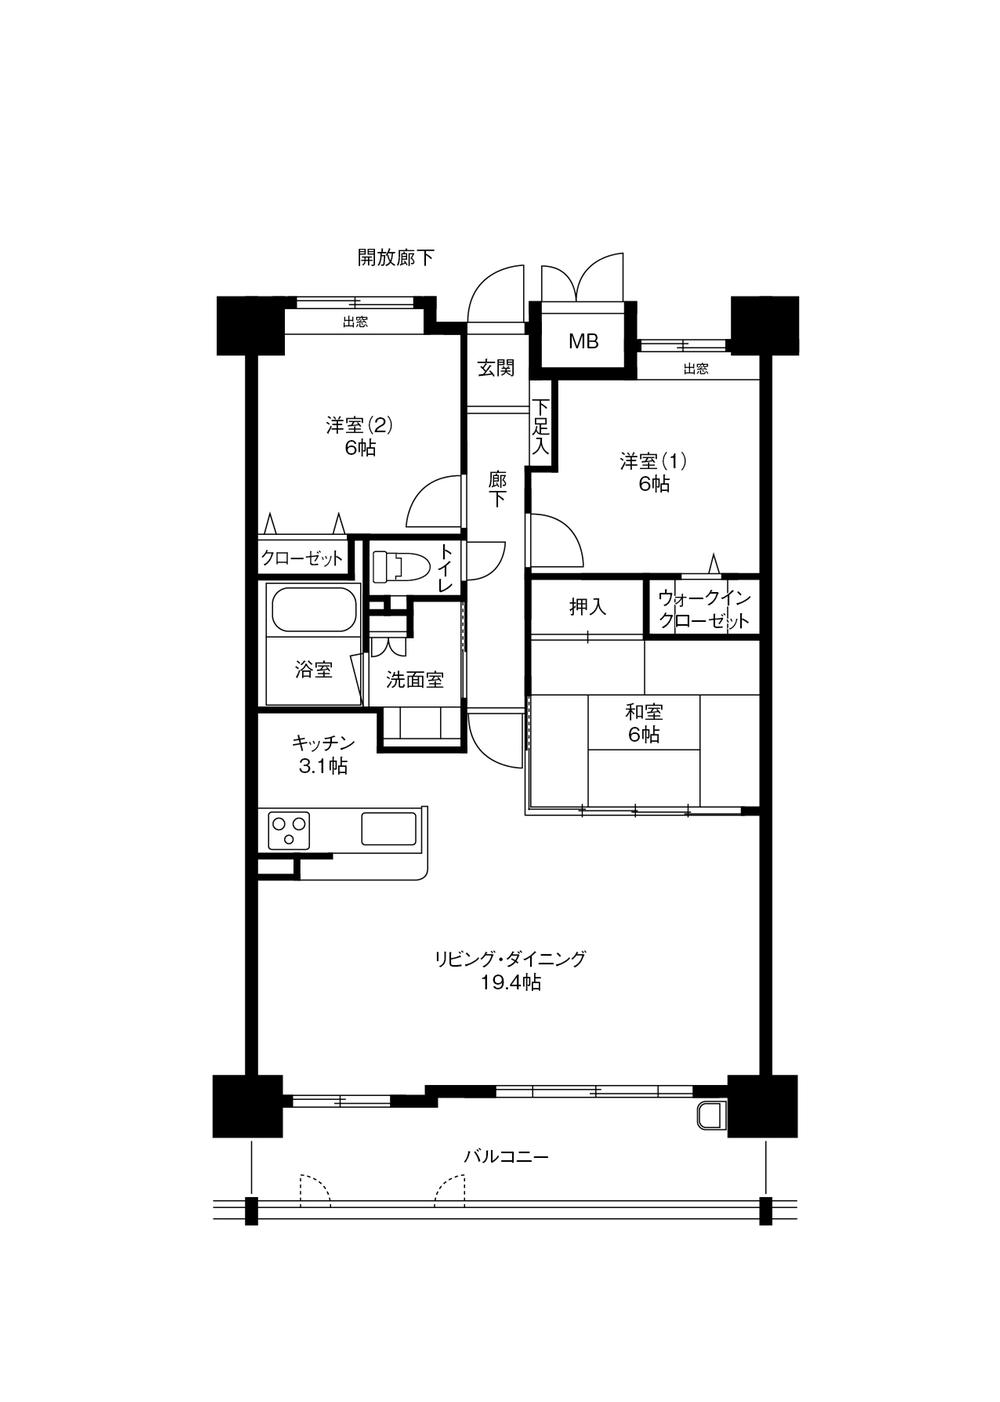 Floor plan. 3LDK, Price 25,900,000 yen, Occupied area 83.52 sq m , Spacious LDK of balcony area 12.89 sq m 22.5 Pledge. It has become even more likely to be the arrangement of the furniture in a rectangular living.